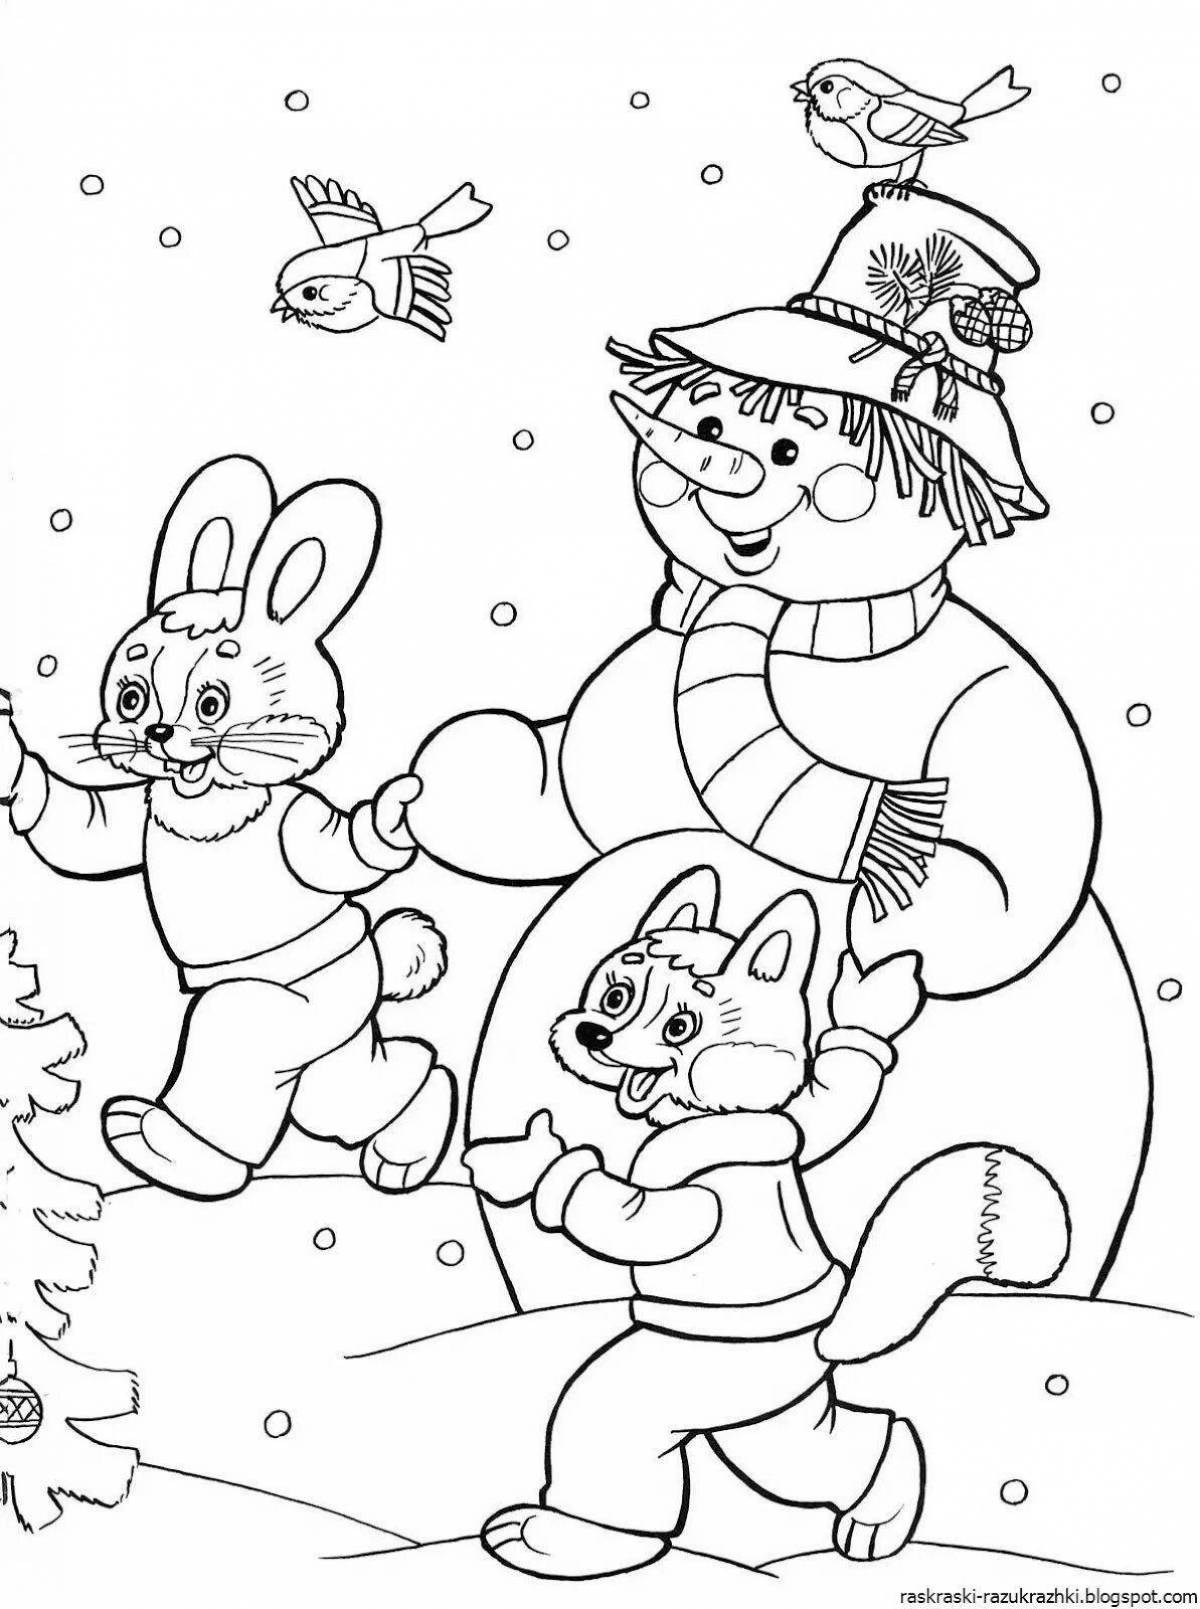 Magic winter coloring book for kids 6-7 years old